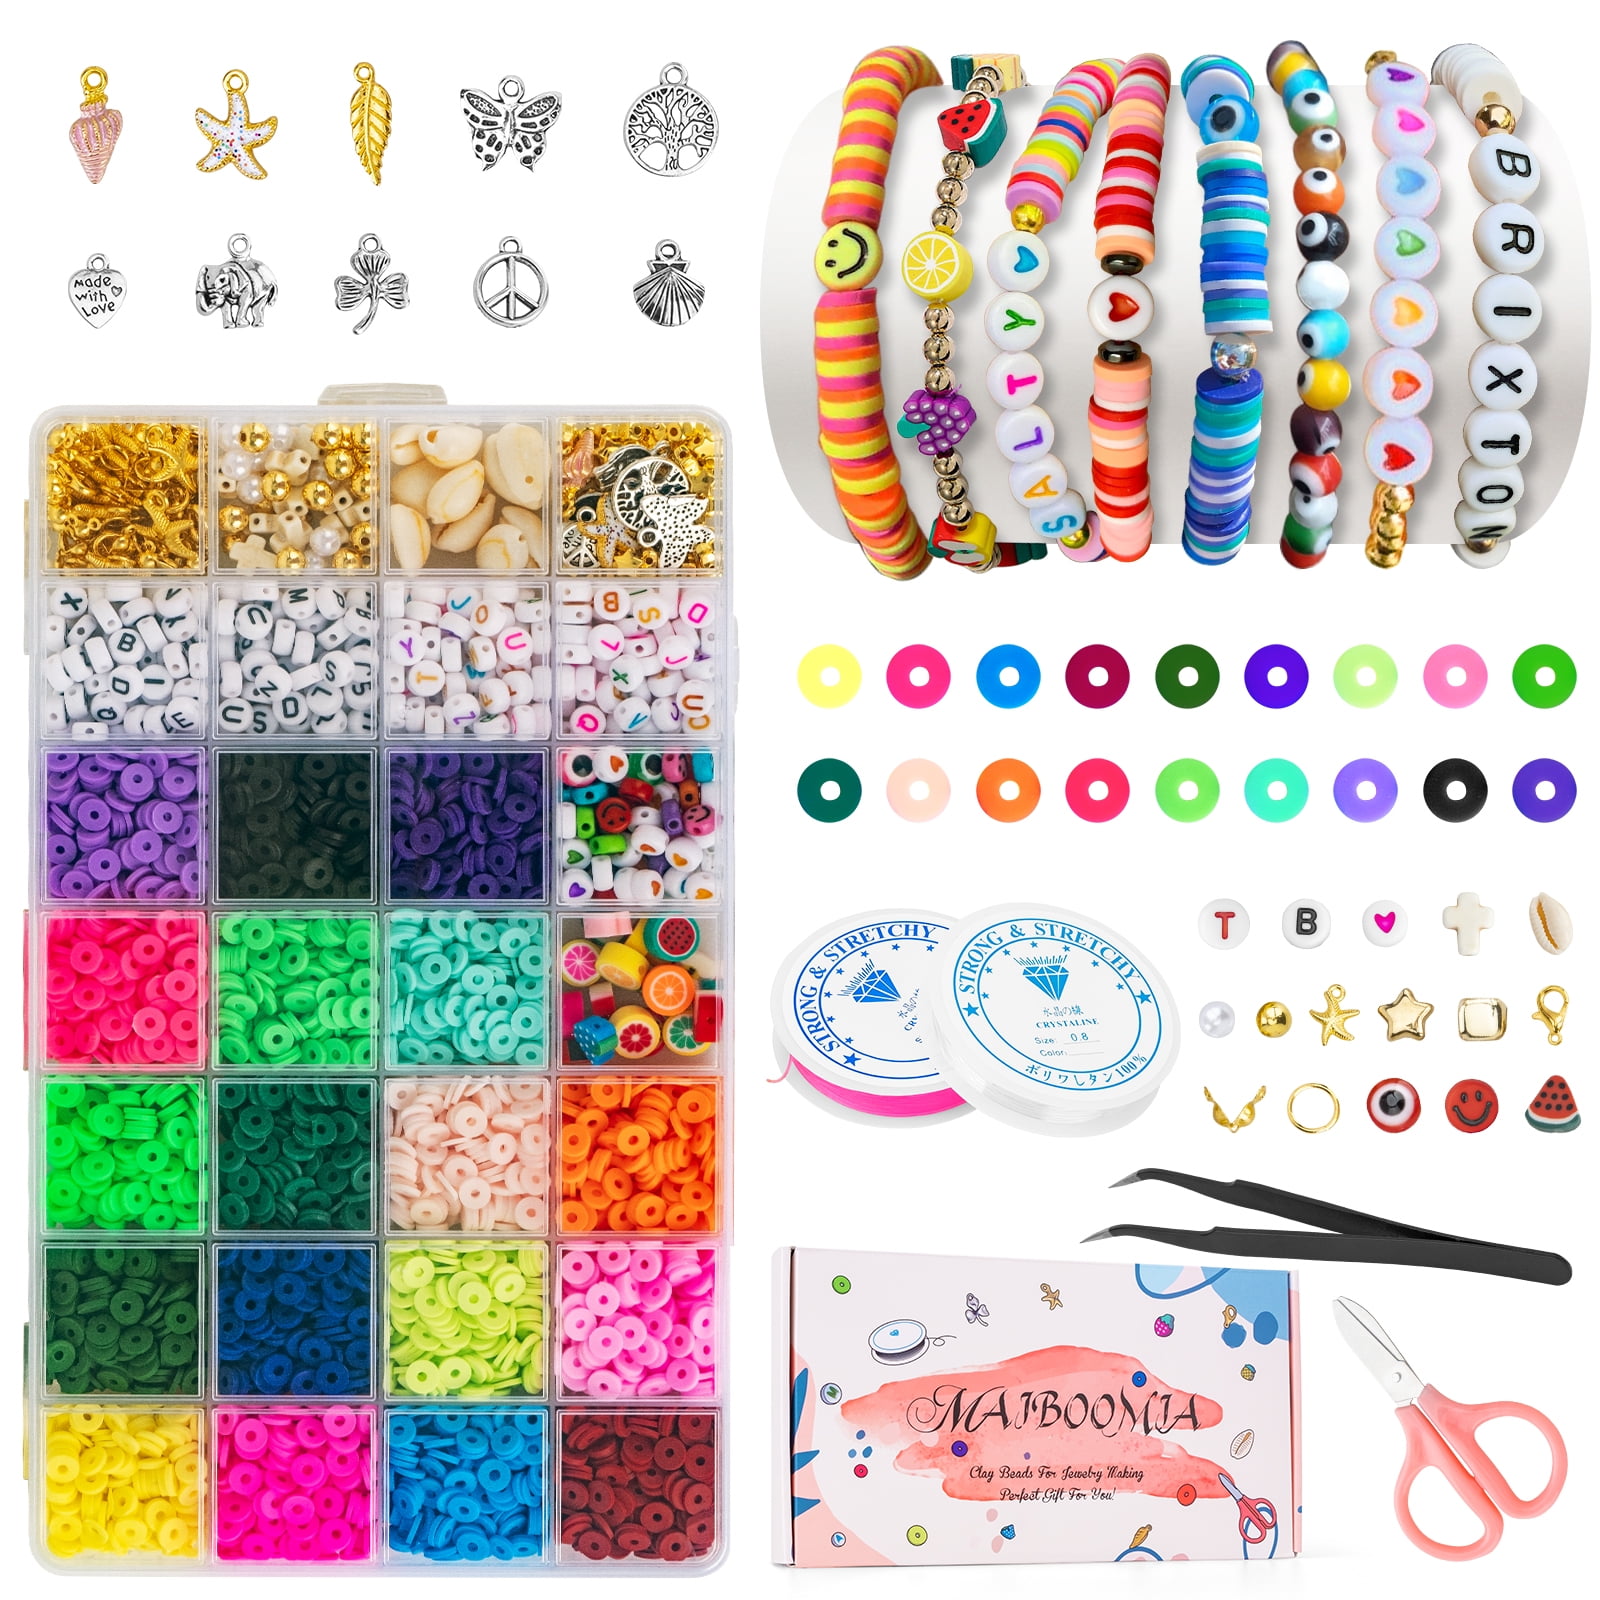 Kandi Beads Bracelet Making Kit, Rainbow Pony Beads for Jewelry Making DIY  for Girls Women, Hair Beads for Braids with Hair Beaders Elastic String :  Amazon.in: Home & Kitchen